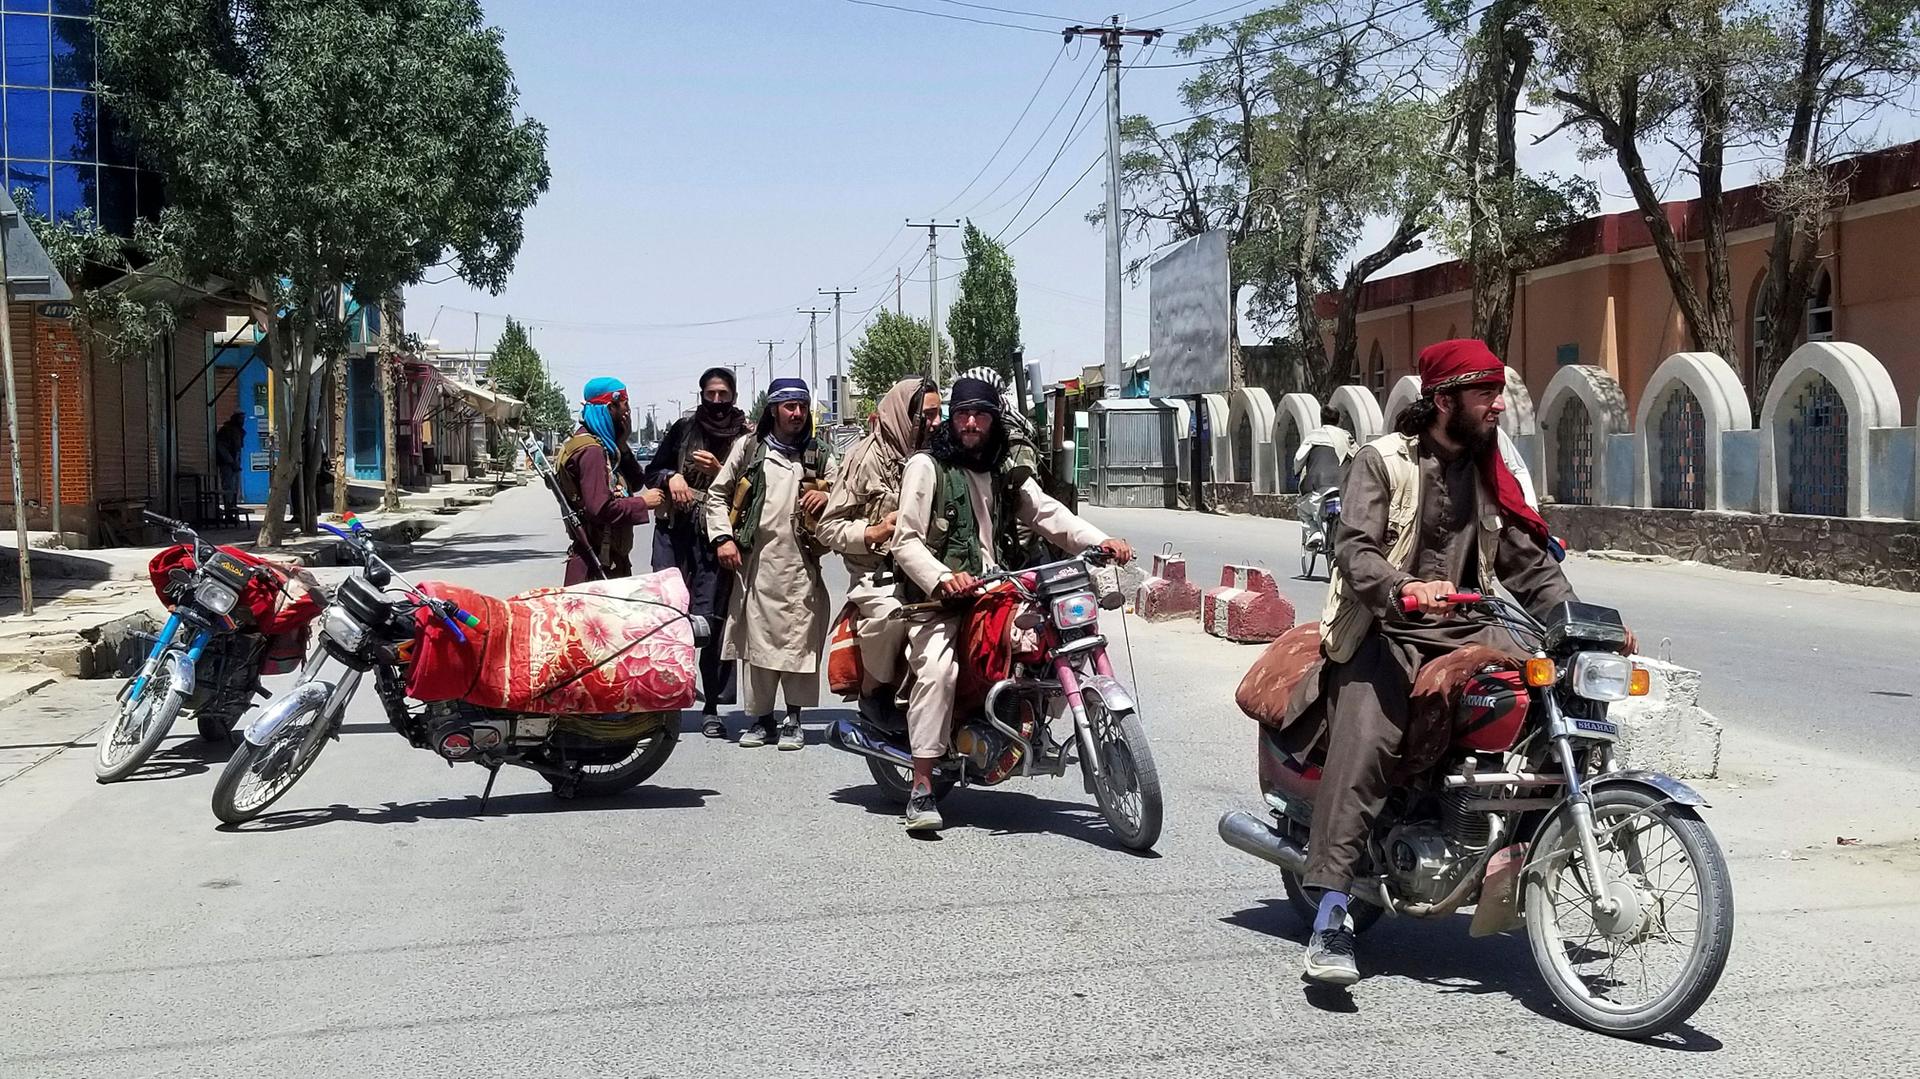 Several Taliban fighters are shown standing in a street or sitting on blanket-covered motorcycles.